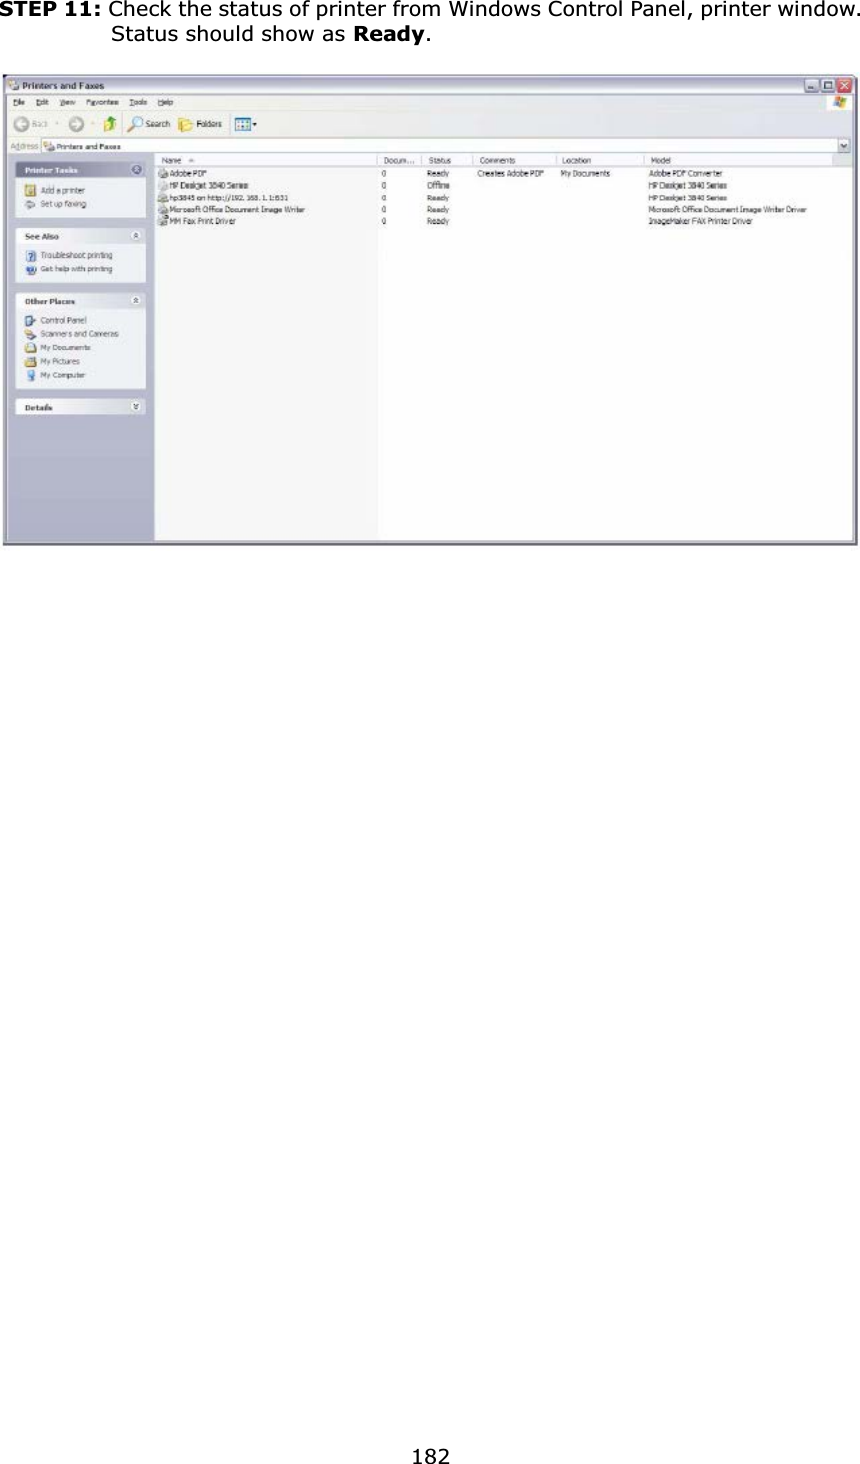 182STEP 11: Check the status of printer from Windows Control Panel, printer window.     Status should show as Ready.